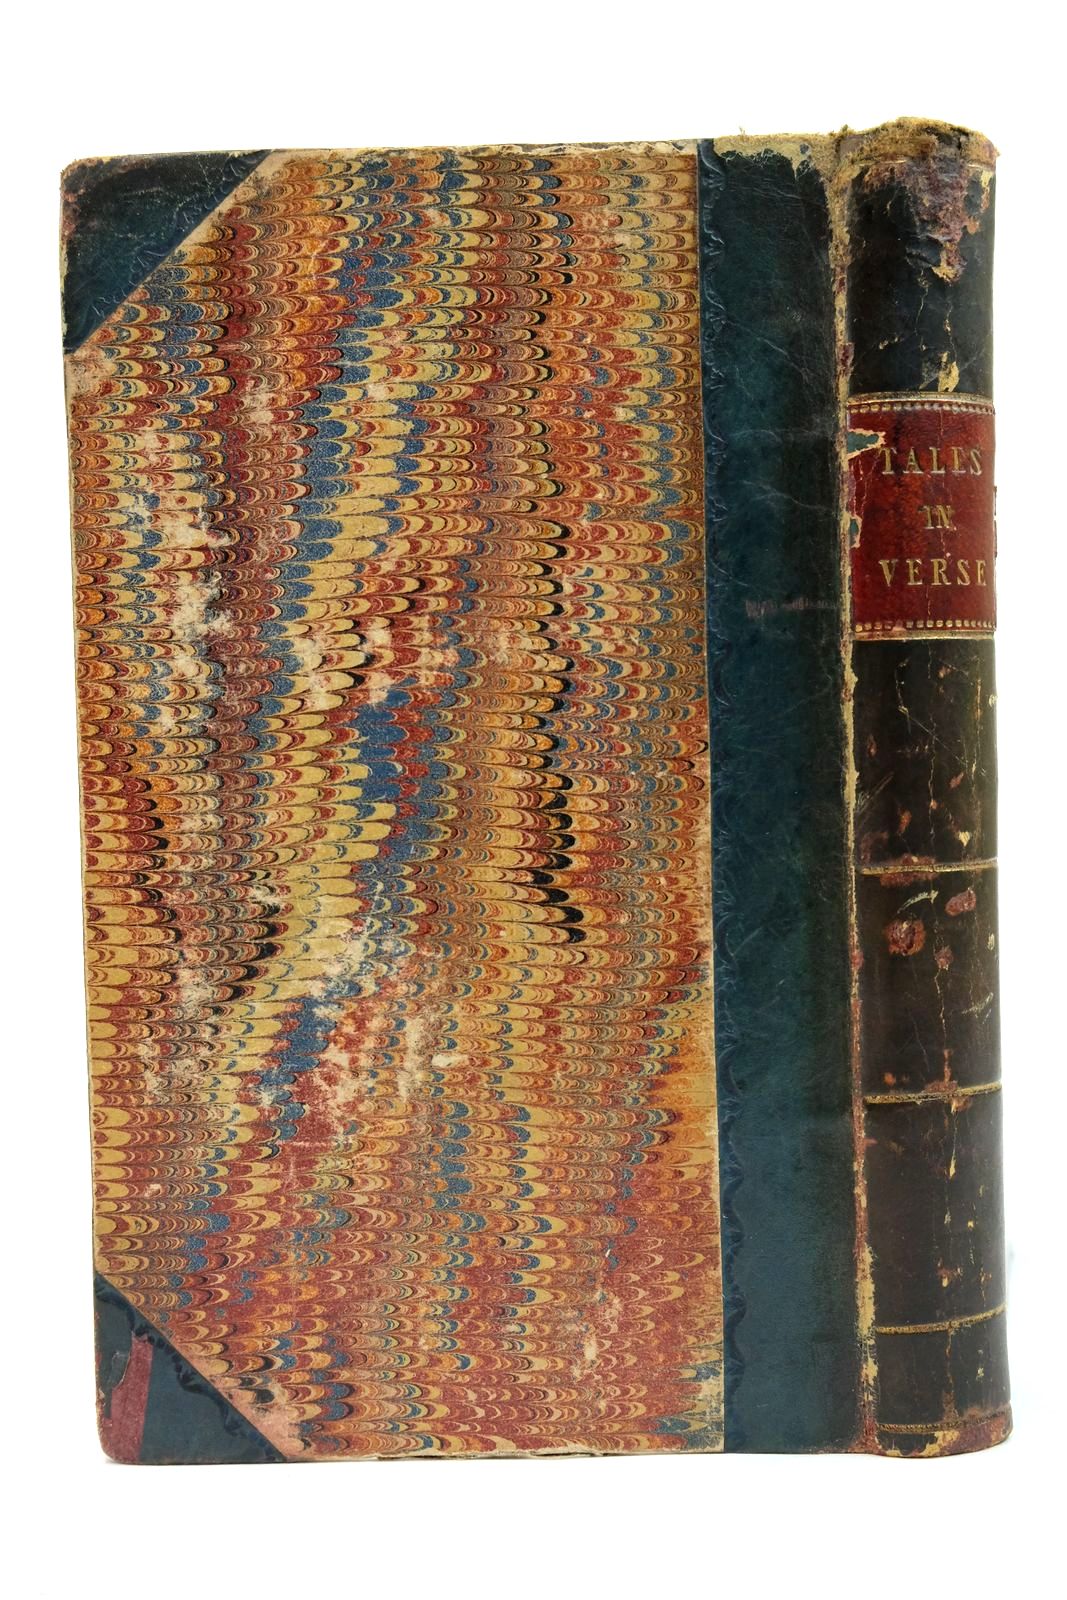 Photo of TALES IN VERSE FOR THE YOUNG written by Howitt, Mary published by William Darton And Son (STOCK CODE: 2134931)  for sale by Stella & Rose's Books